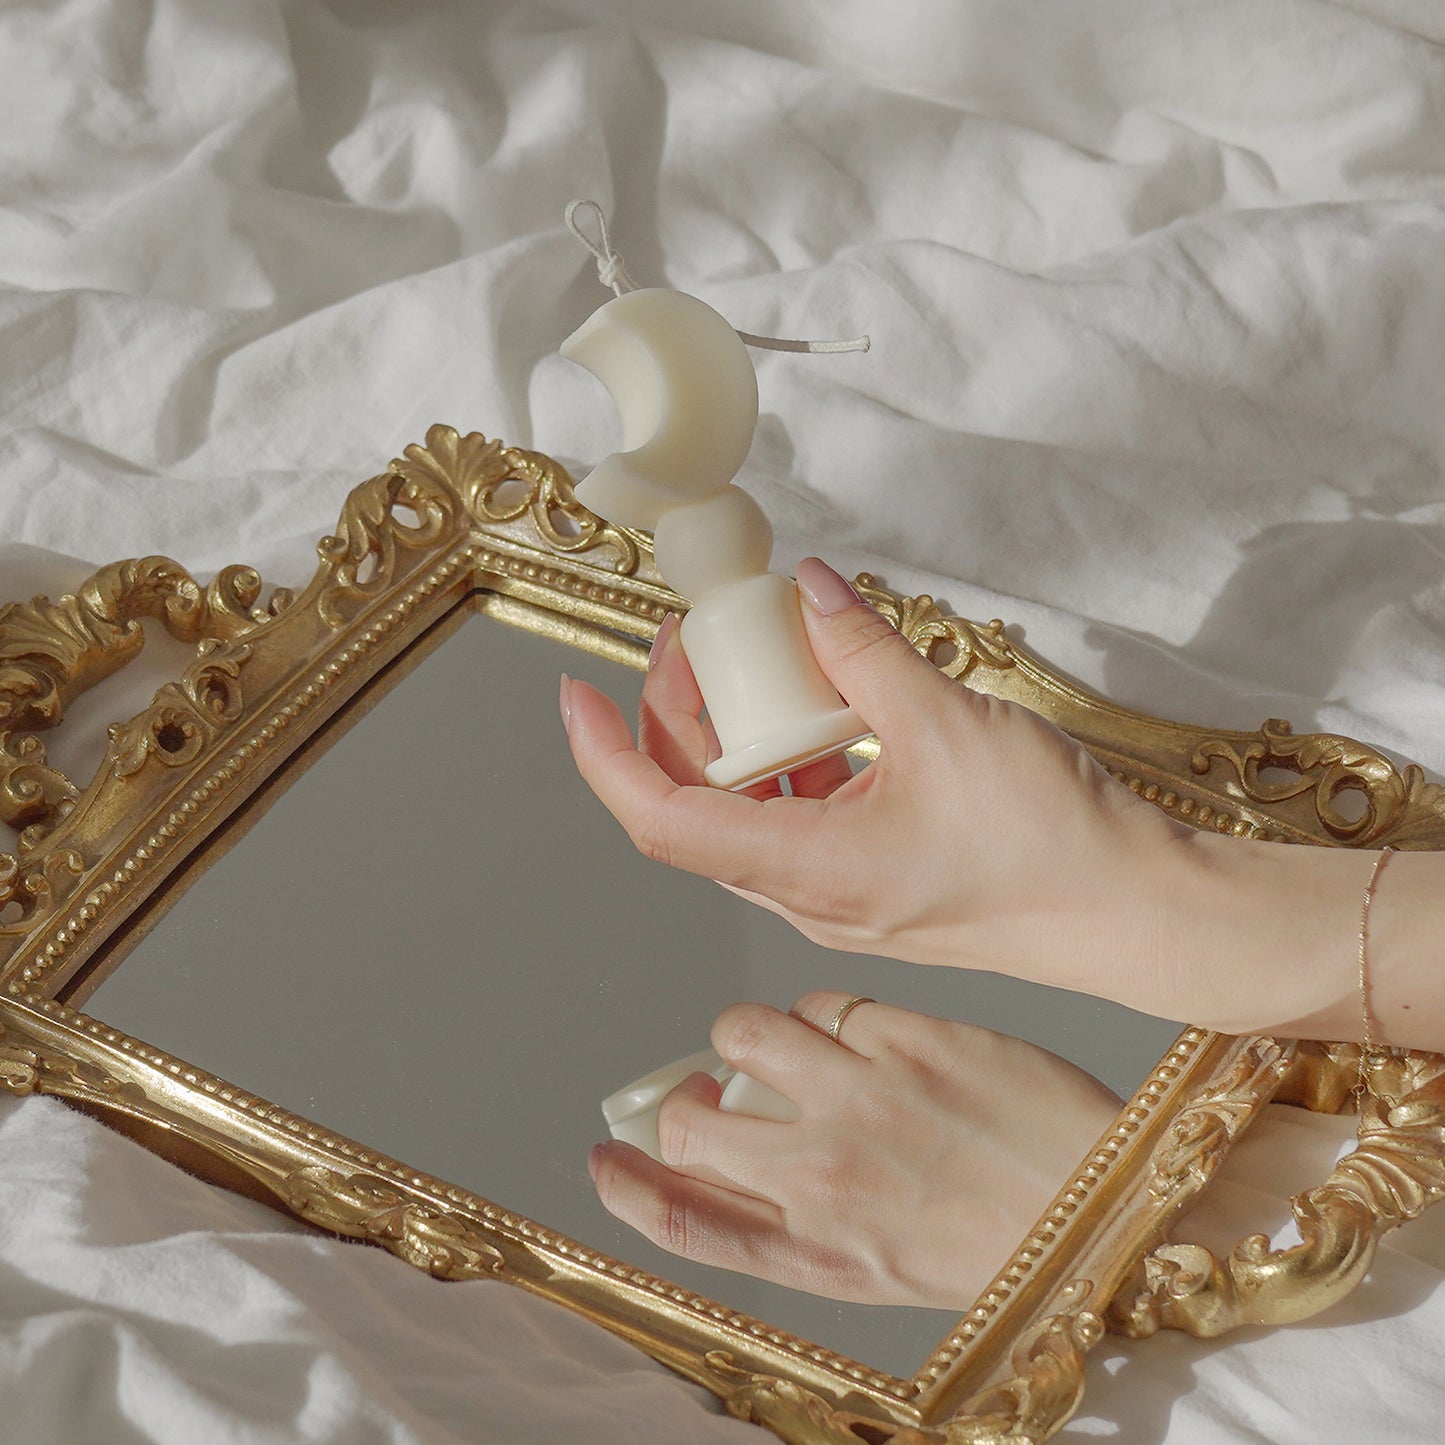 French style rectangular shape mirror placed on a white sheet of bed and a hand holding a crescent moon shape candle.